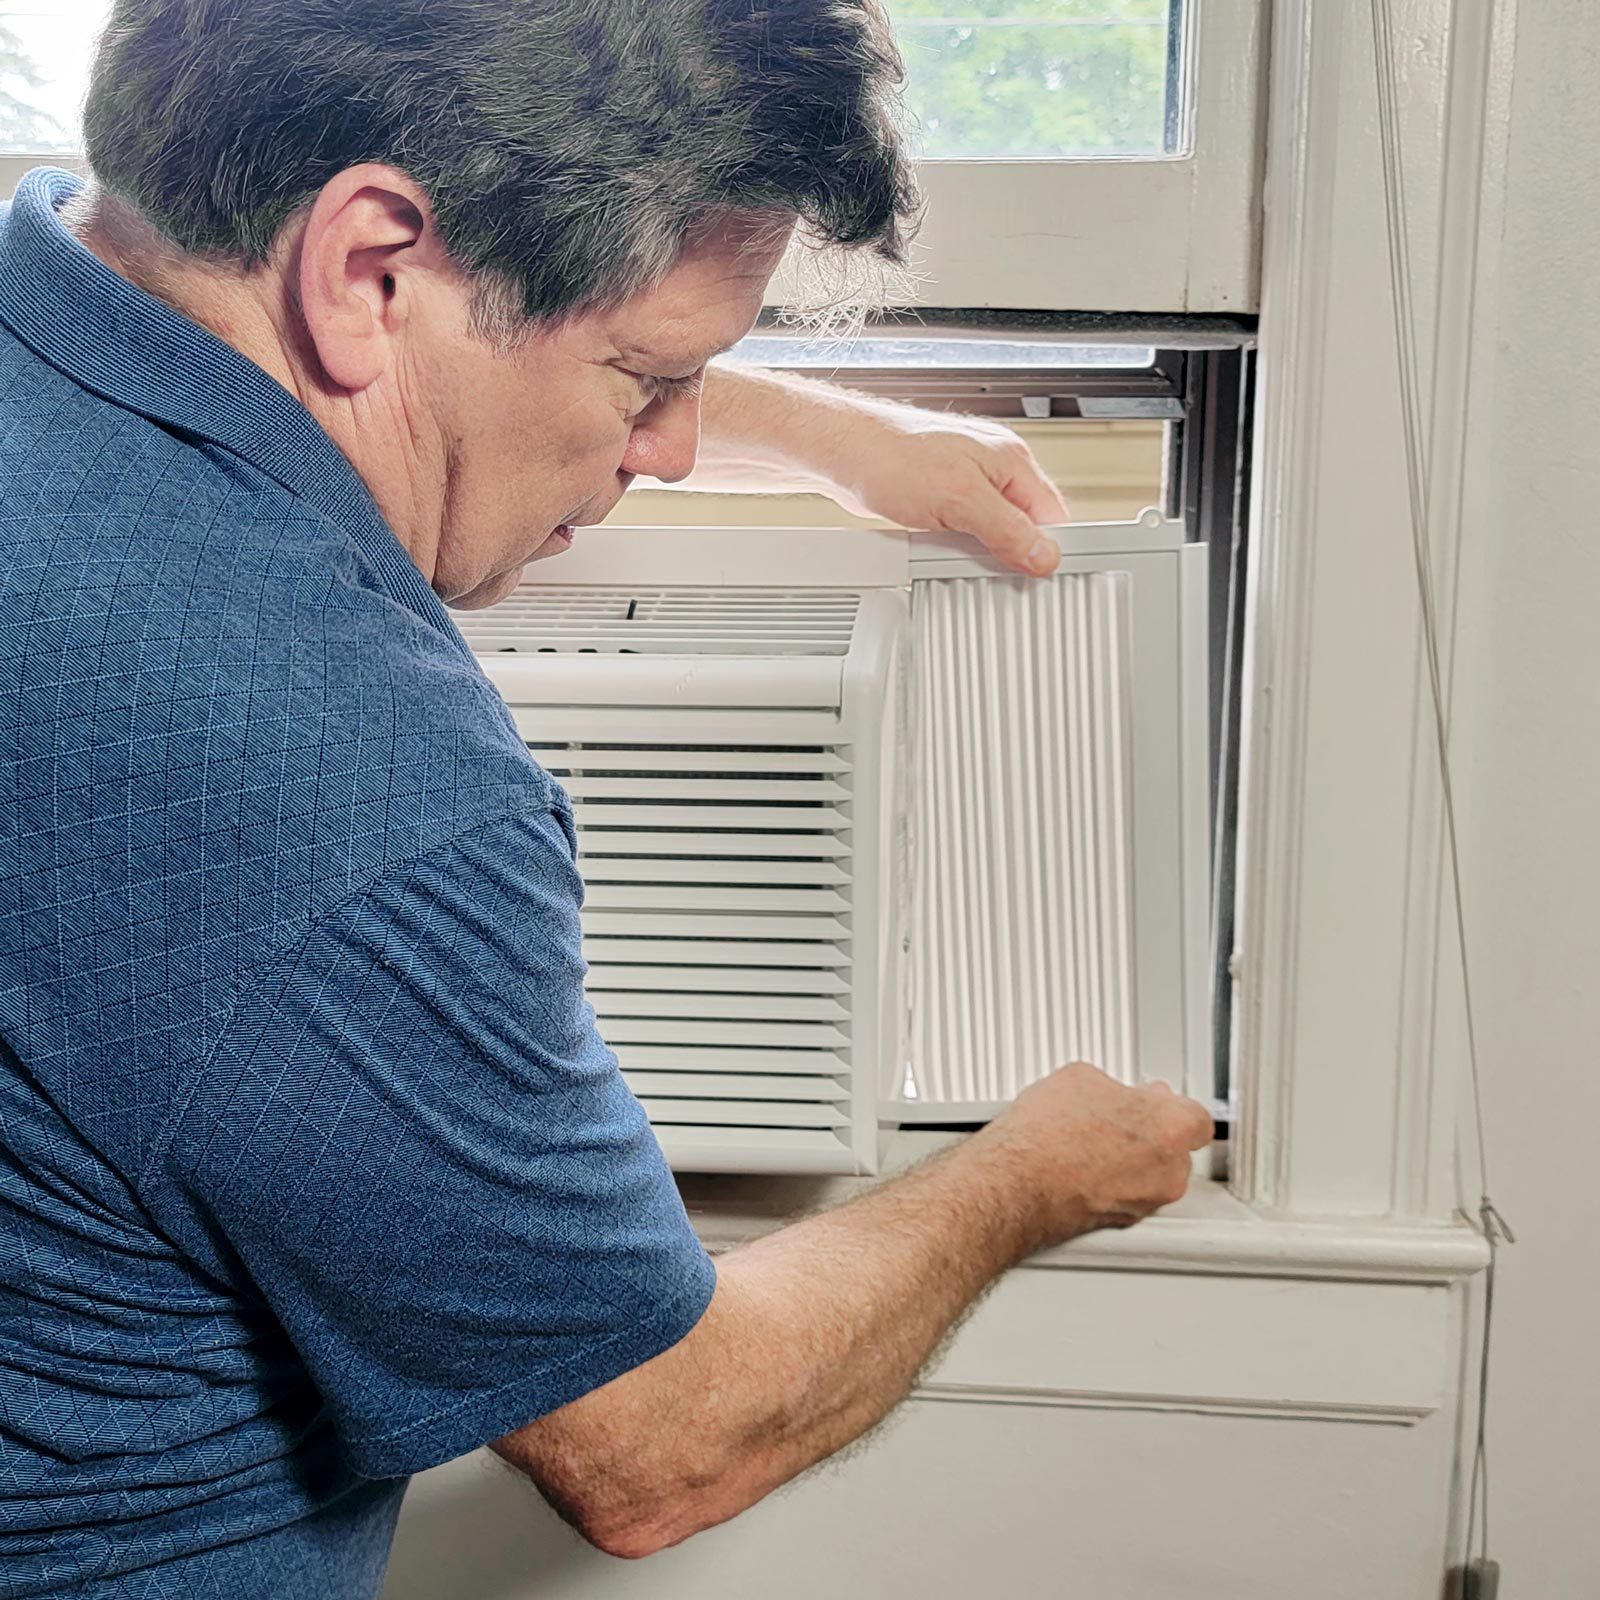 How to Clean Your Home AC Unit by Yourself: DIY Steps